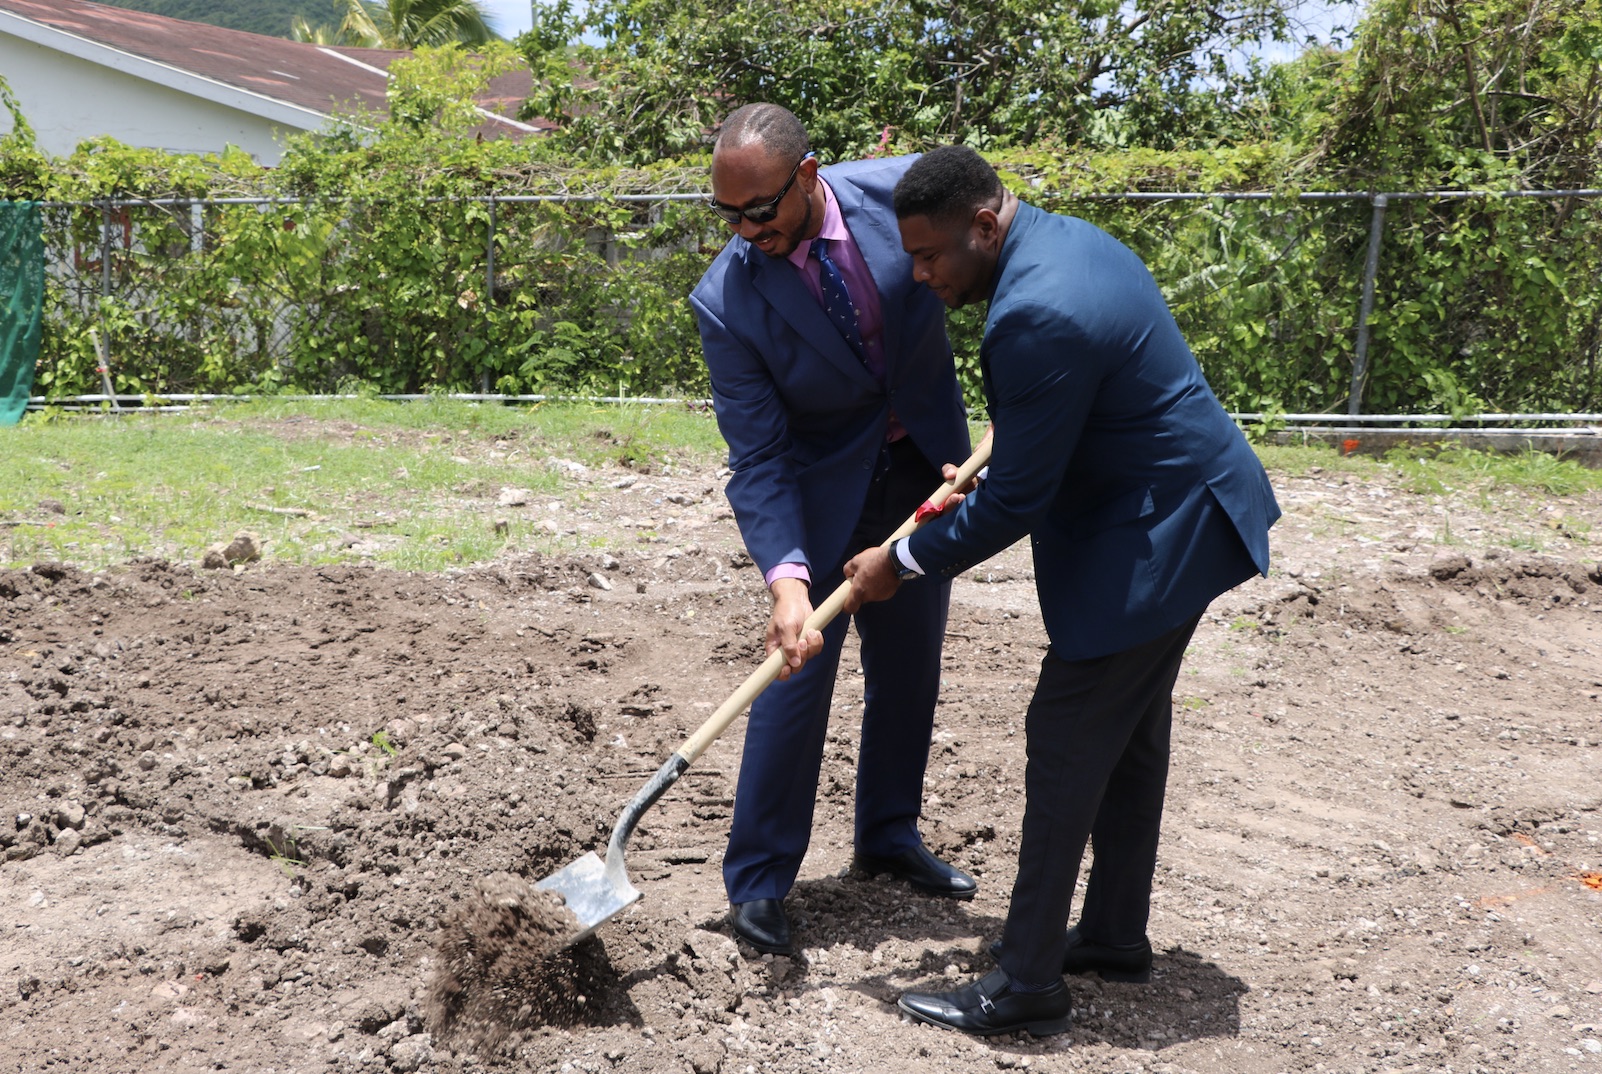 Hon. Jonel Powell, Federal Minister of Education; and Hon. Troy Liburd, Junior Minister of Education in the Nevis Island Administration, turn the sod to signal the start of construction of a state-of-the-art multipurpose technical wing at the Gingerland Secondary School on August 06, 2020, as part of an US$8million St. Kitts and Nevis Technical Vocational Education and Training (TVET) Enhancement Project